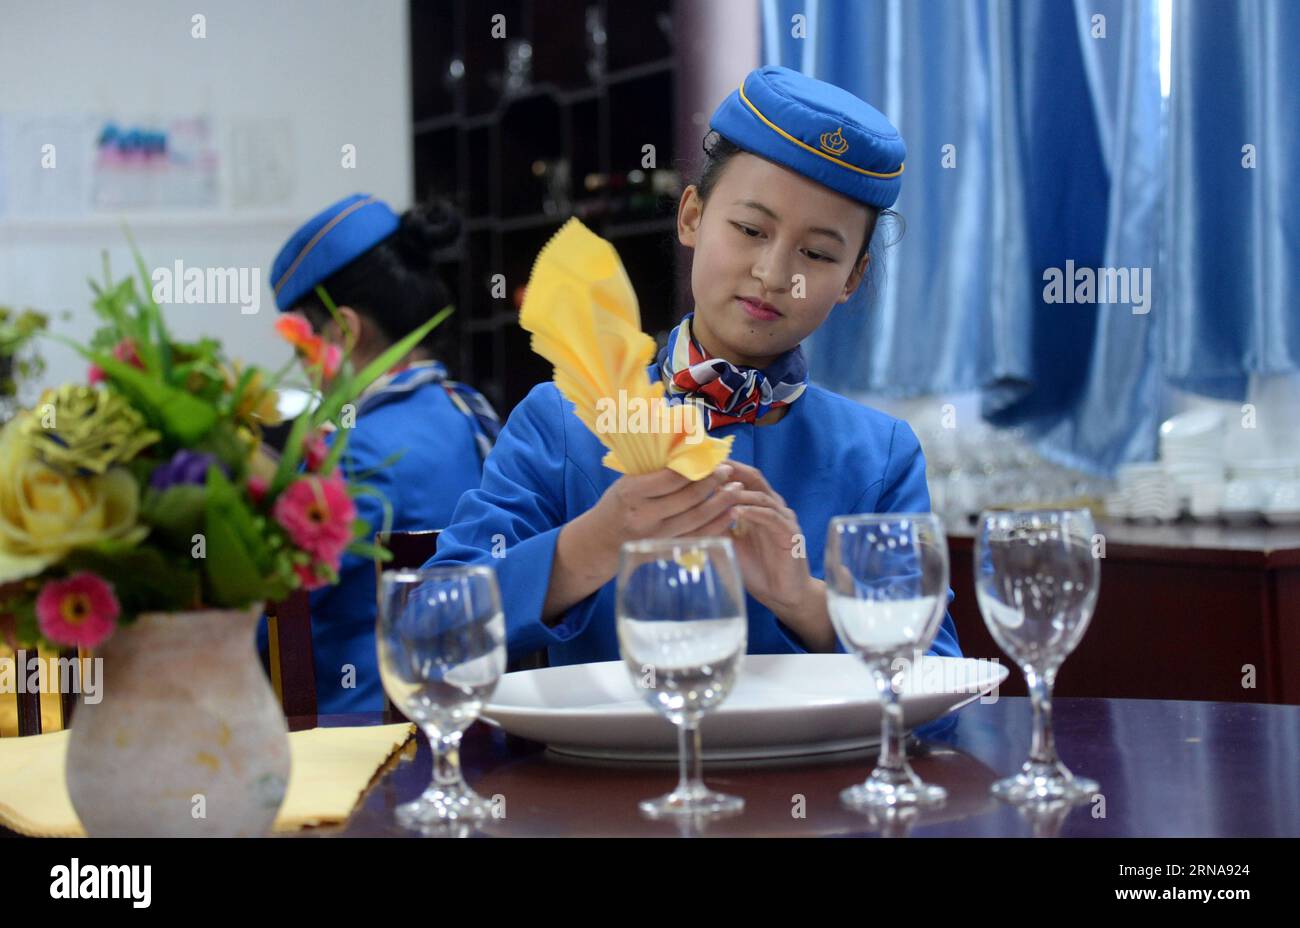 Flugbegleiter-Schule in China CHONGQING, Jan. 13, 2016 -- A student takes training of catering service at Bishan Vocational Education Center in Chongqing, southwest China, Jan. 13, 2016. These students were trained to be stewardesses of the high-speed train. ) (ry) CHINA-CHONGQING-STEWARDESS TRAINING (CN) XiexJie PUBLICATIONxNOTxINxCHN   Flight attendants School in China Chongqing Jan 13 2016 a Student Takes Training of Catering Service AT Bishan Vocational Education Center in Chongqing Southwest China Jan 13 2016 Thesis Students Were trained to Be stewardess of The High Speed Train Ry China C Stock Photo